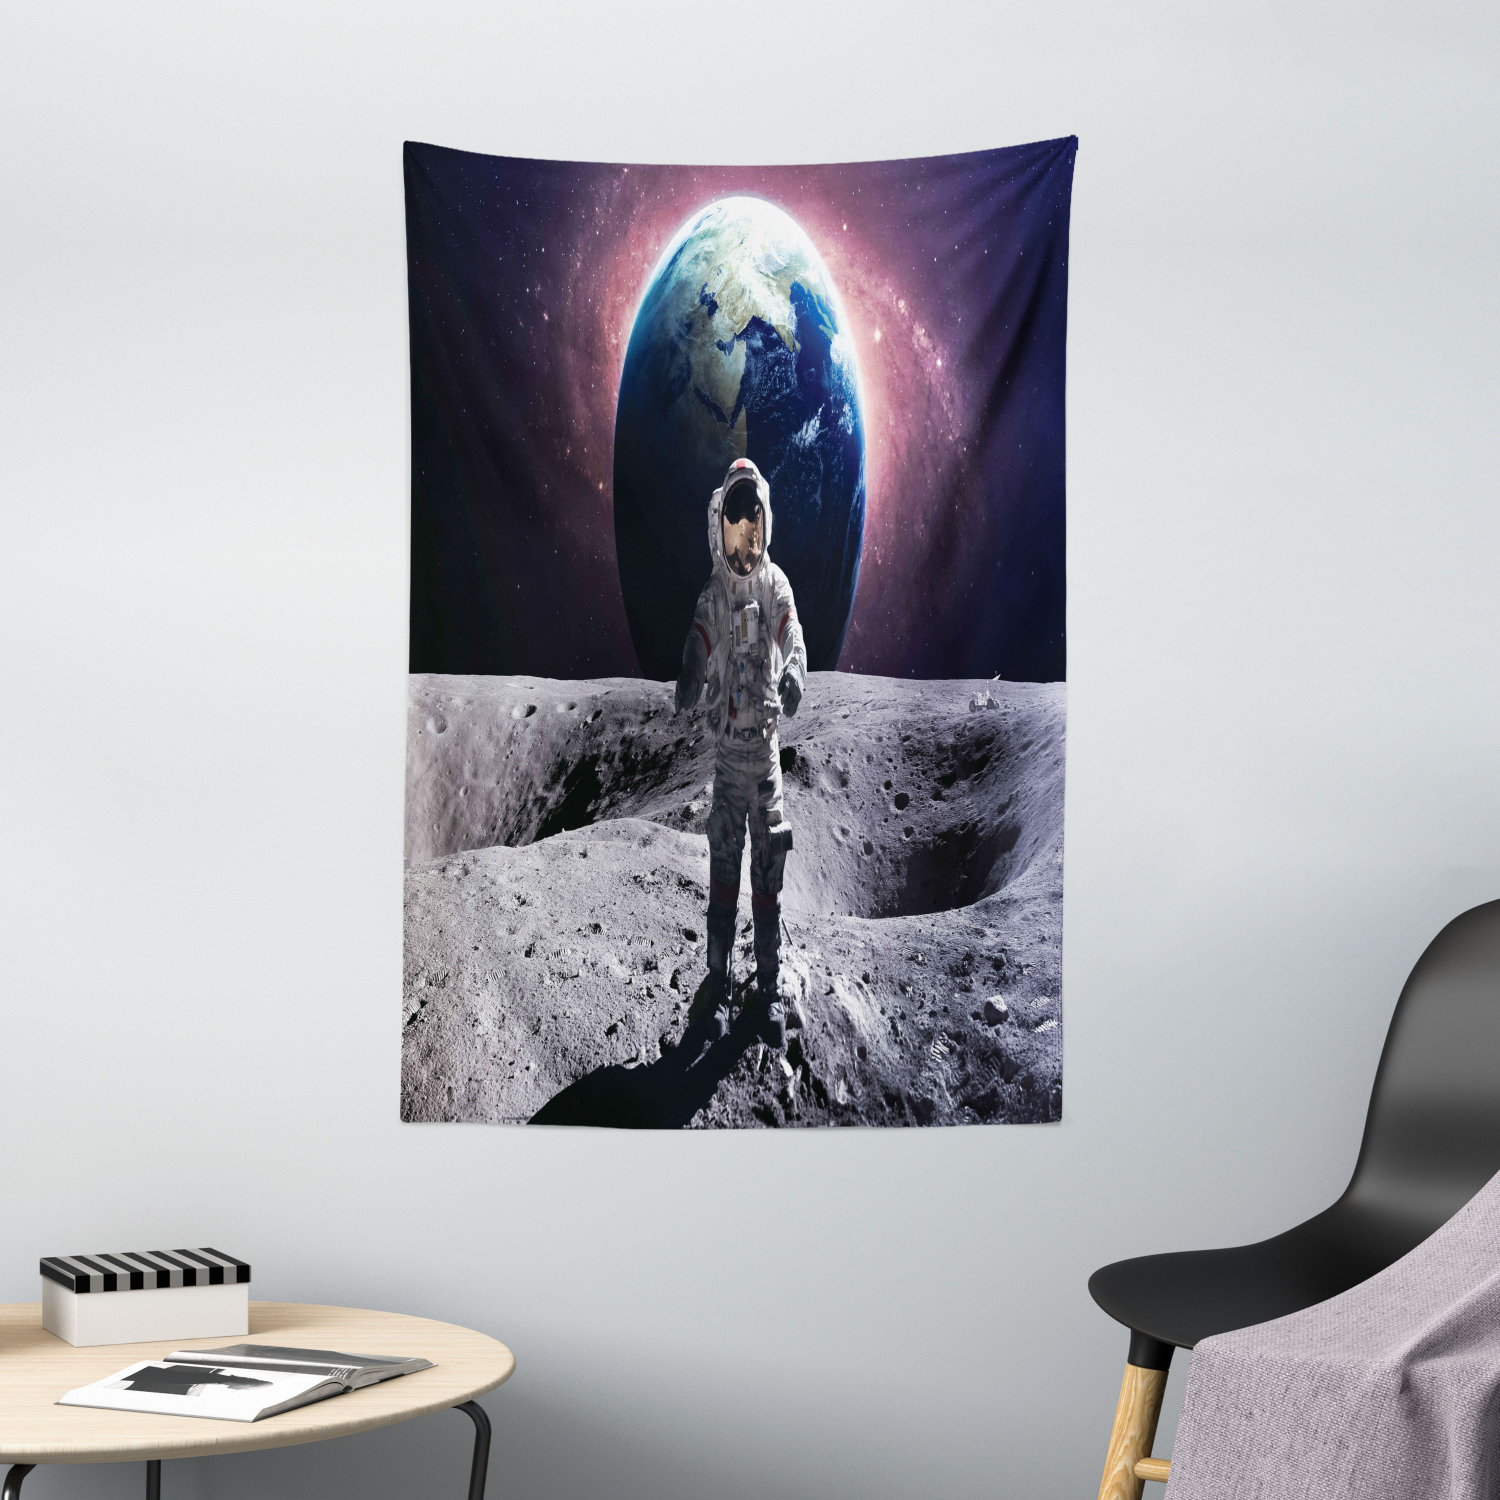 Space Tapestry Brace Astronaut Cosmos Print Wall Hanging Decor 60Wx40L Inches 